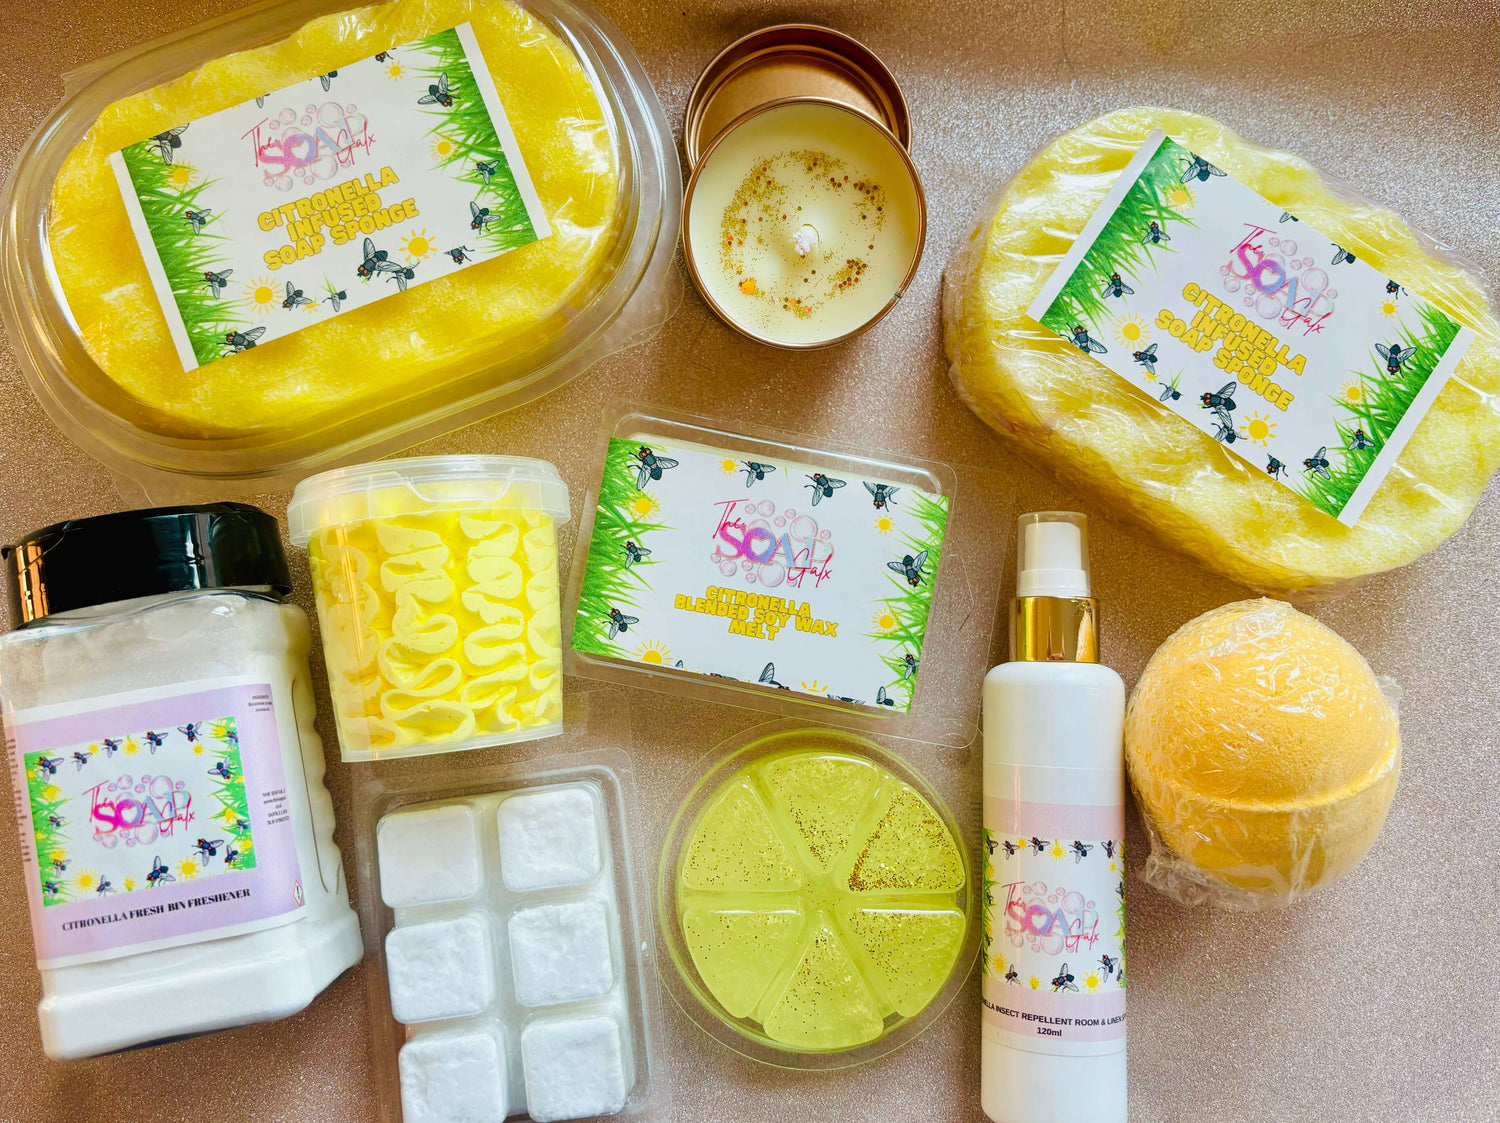 A flat lay of various bath products, including soap bars, a candle featuring The Soap Gal x Citronella Insect Repellent Skincare & Home Fragrance Bundle, lotion, salt, bath fizzies, and a bath bomb, all with colorful packaging.